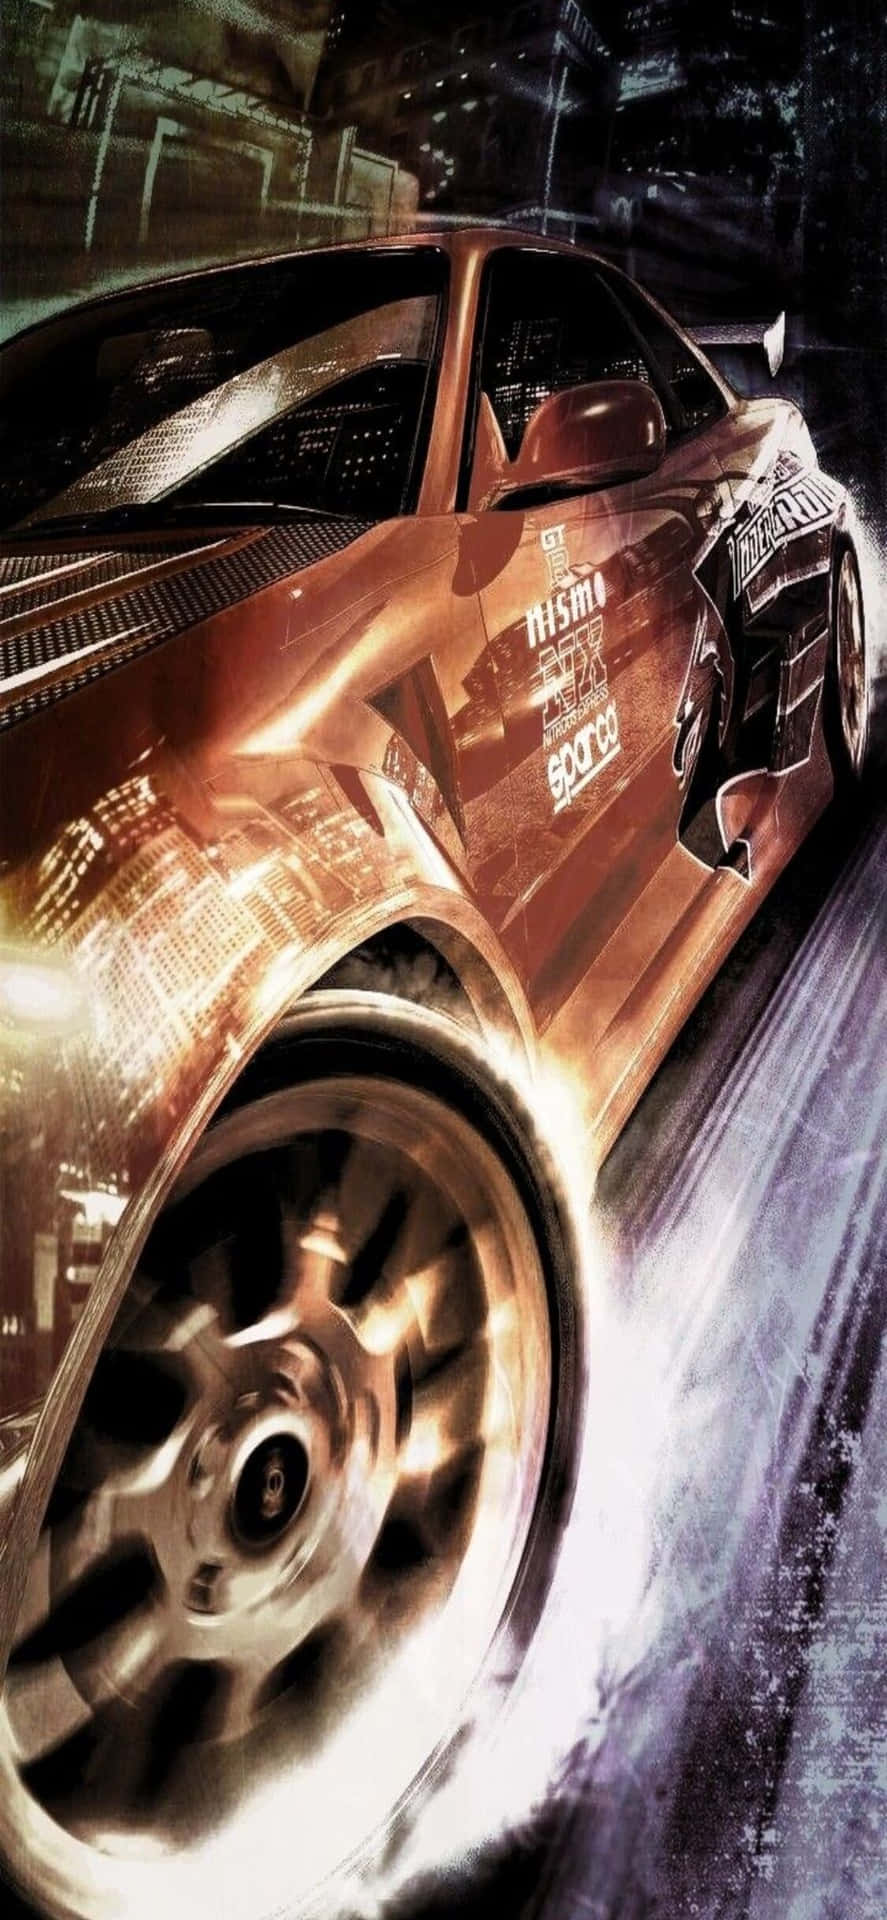 Fast and Furious Showdown Free Download - IPC Games